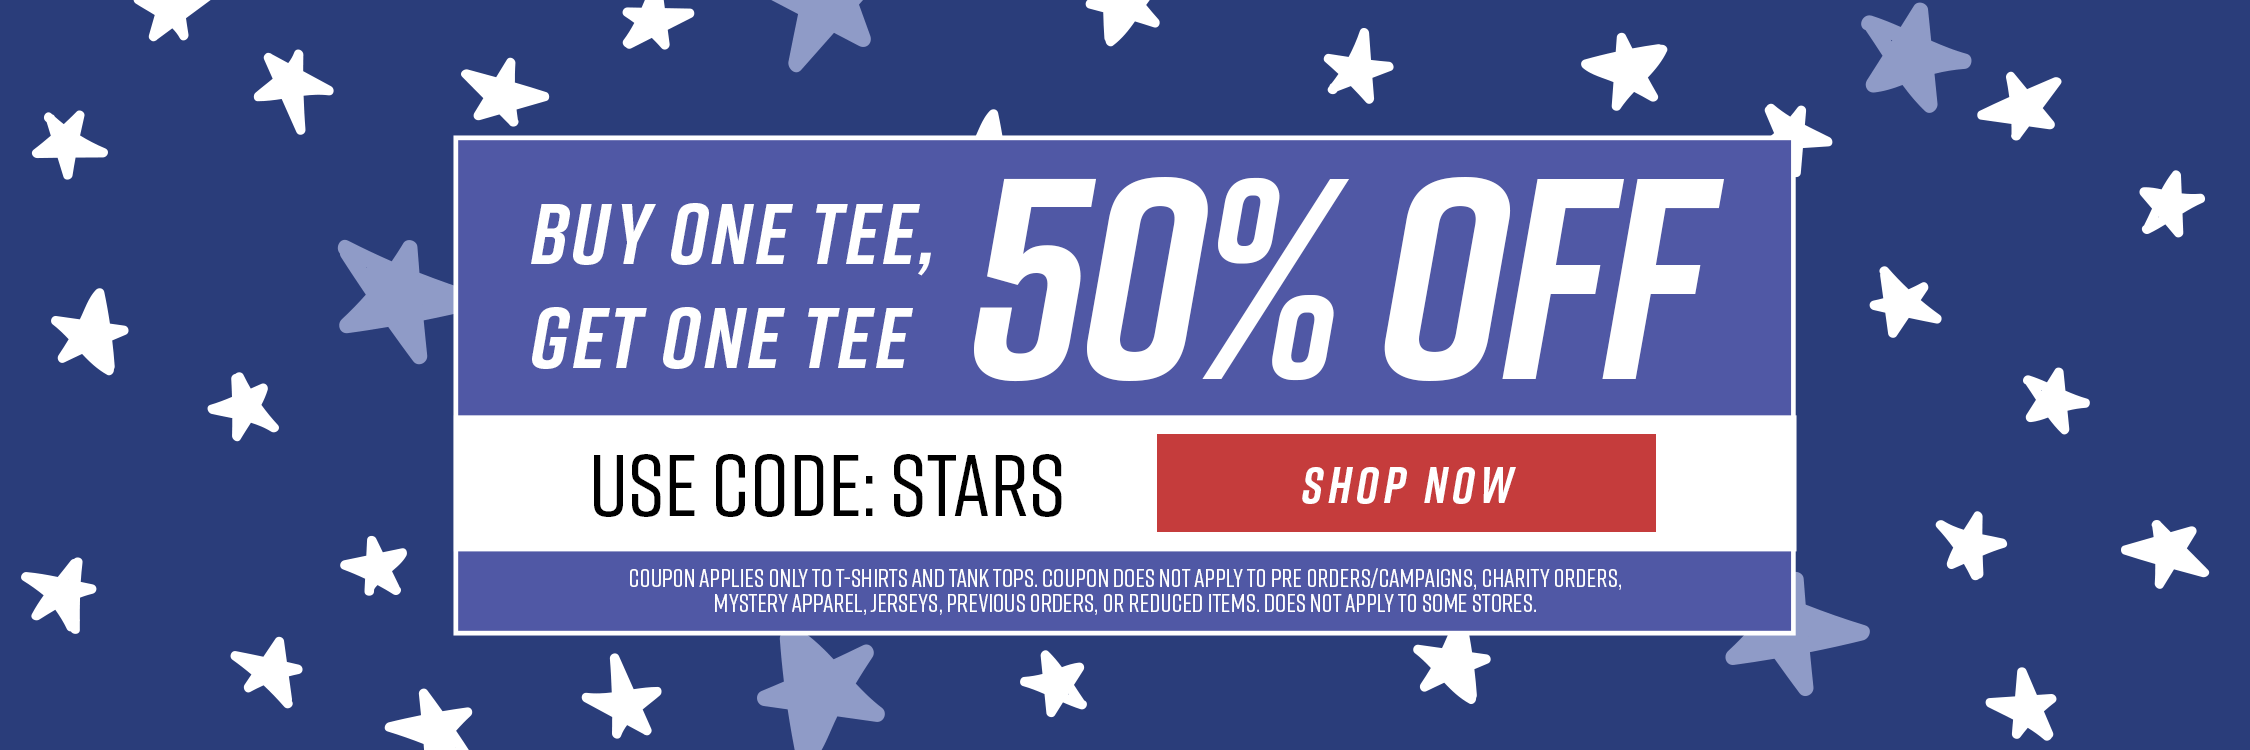 Buy One Tee, Get One 50% Off. Code STARS. Shop Now. Exclusions apply. Blue and white stars.